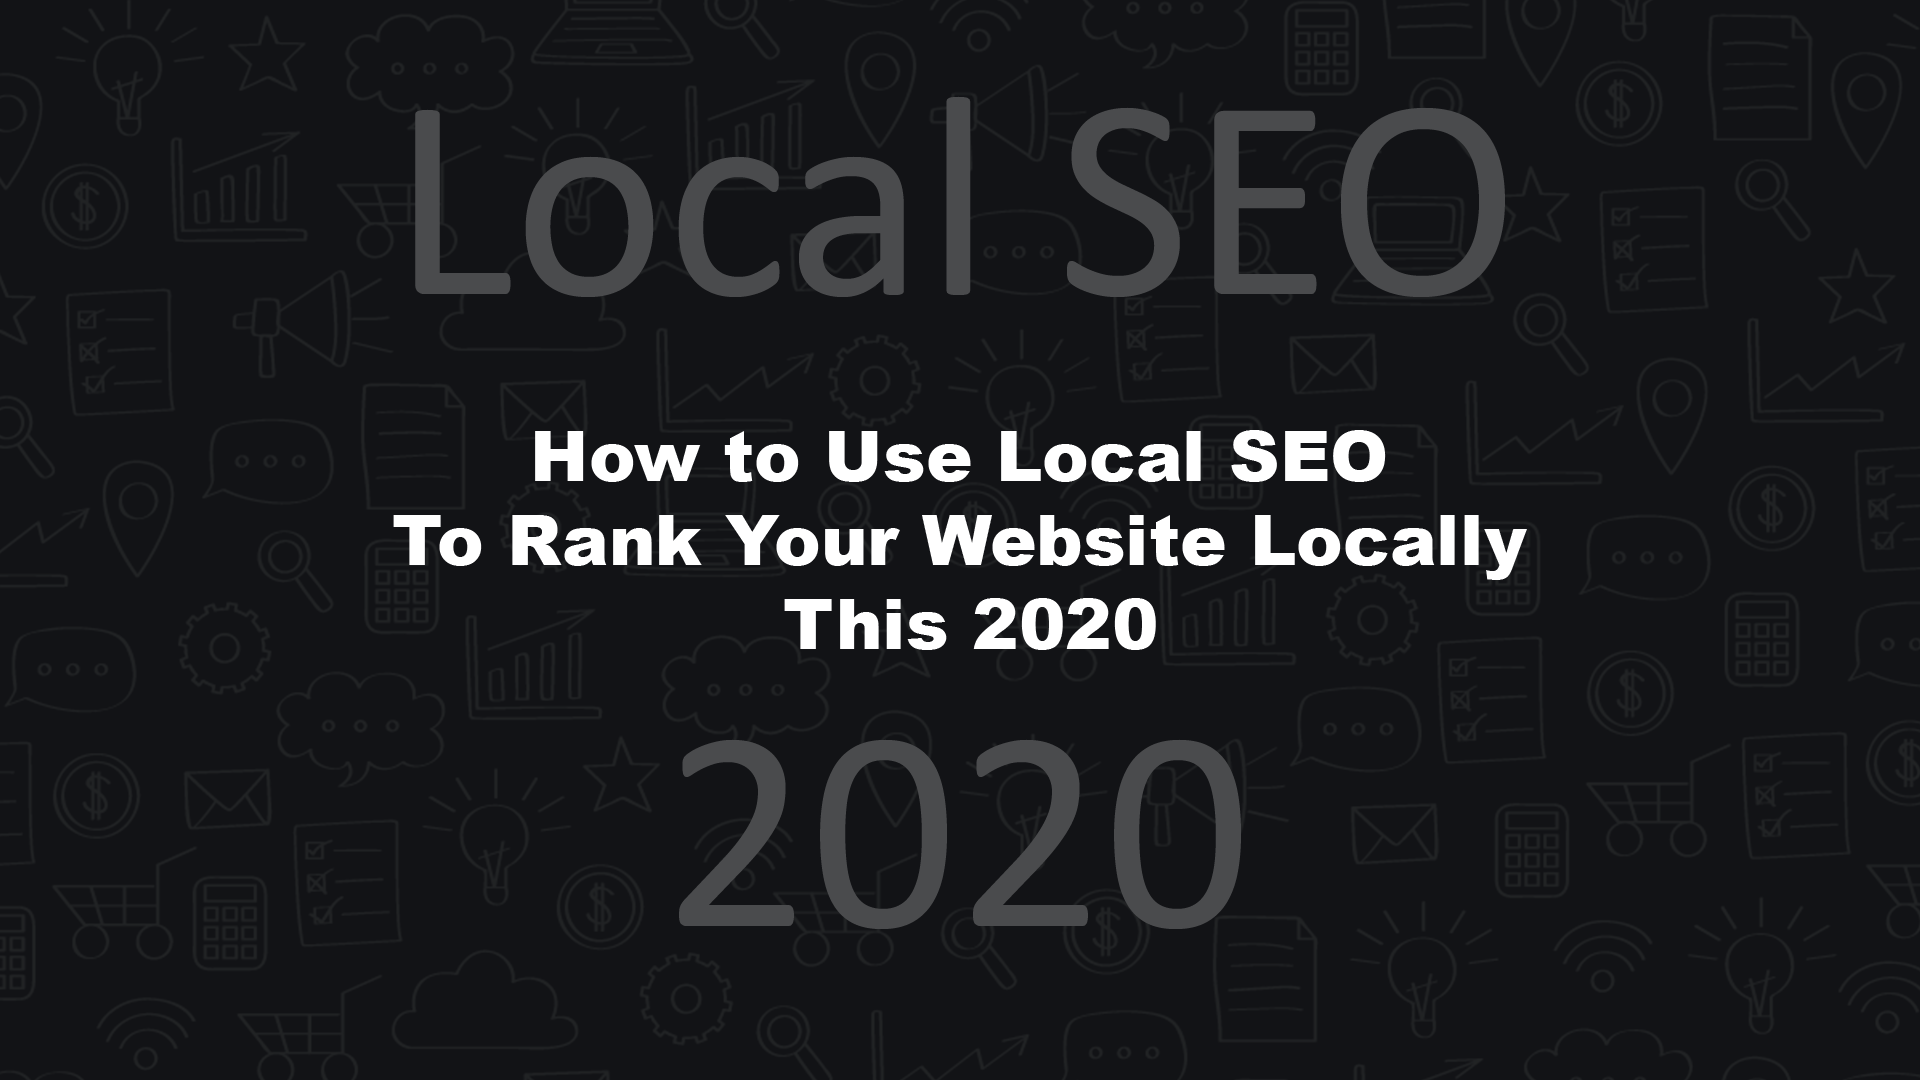 Local SEO To Rank Your Website Locally This 2020